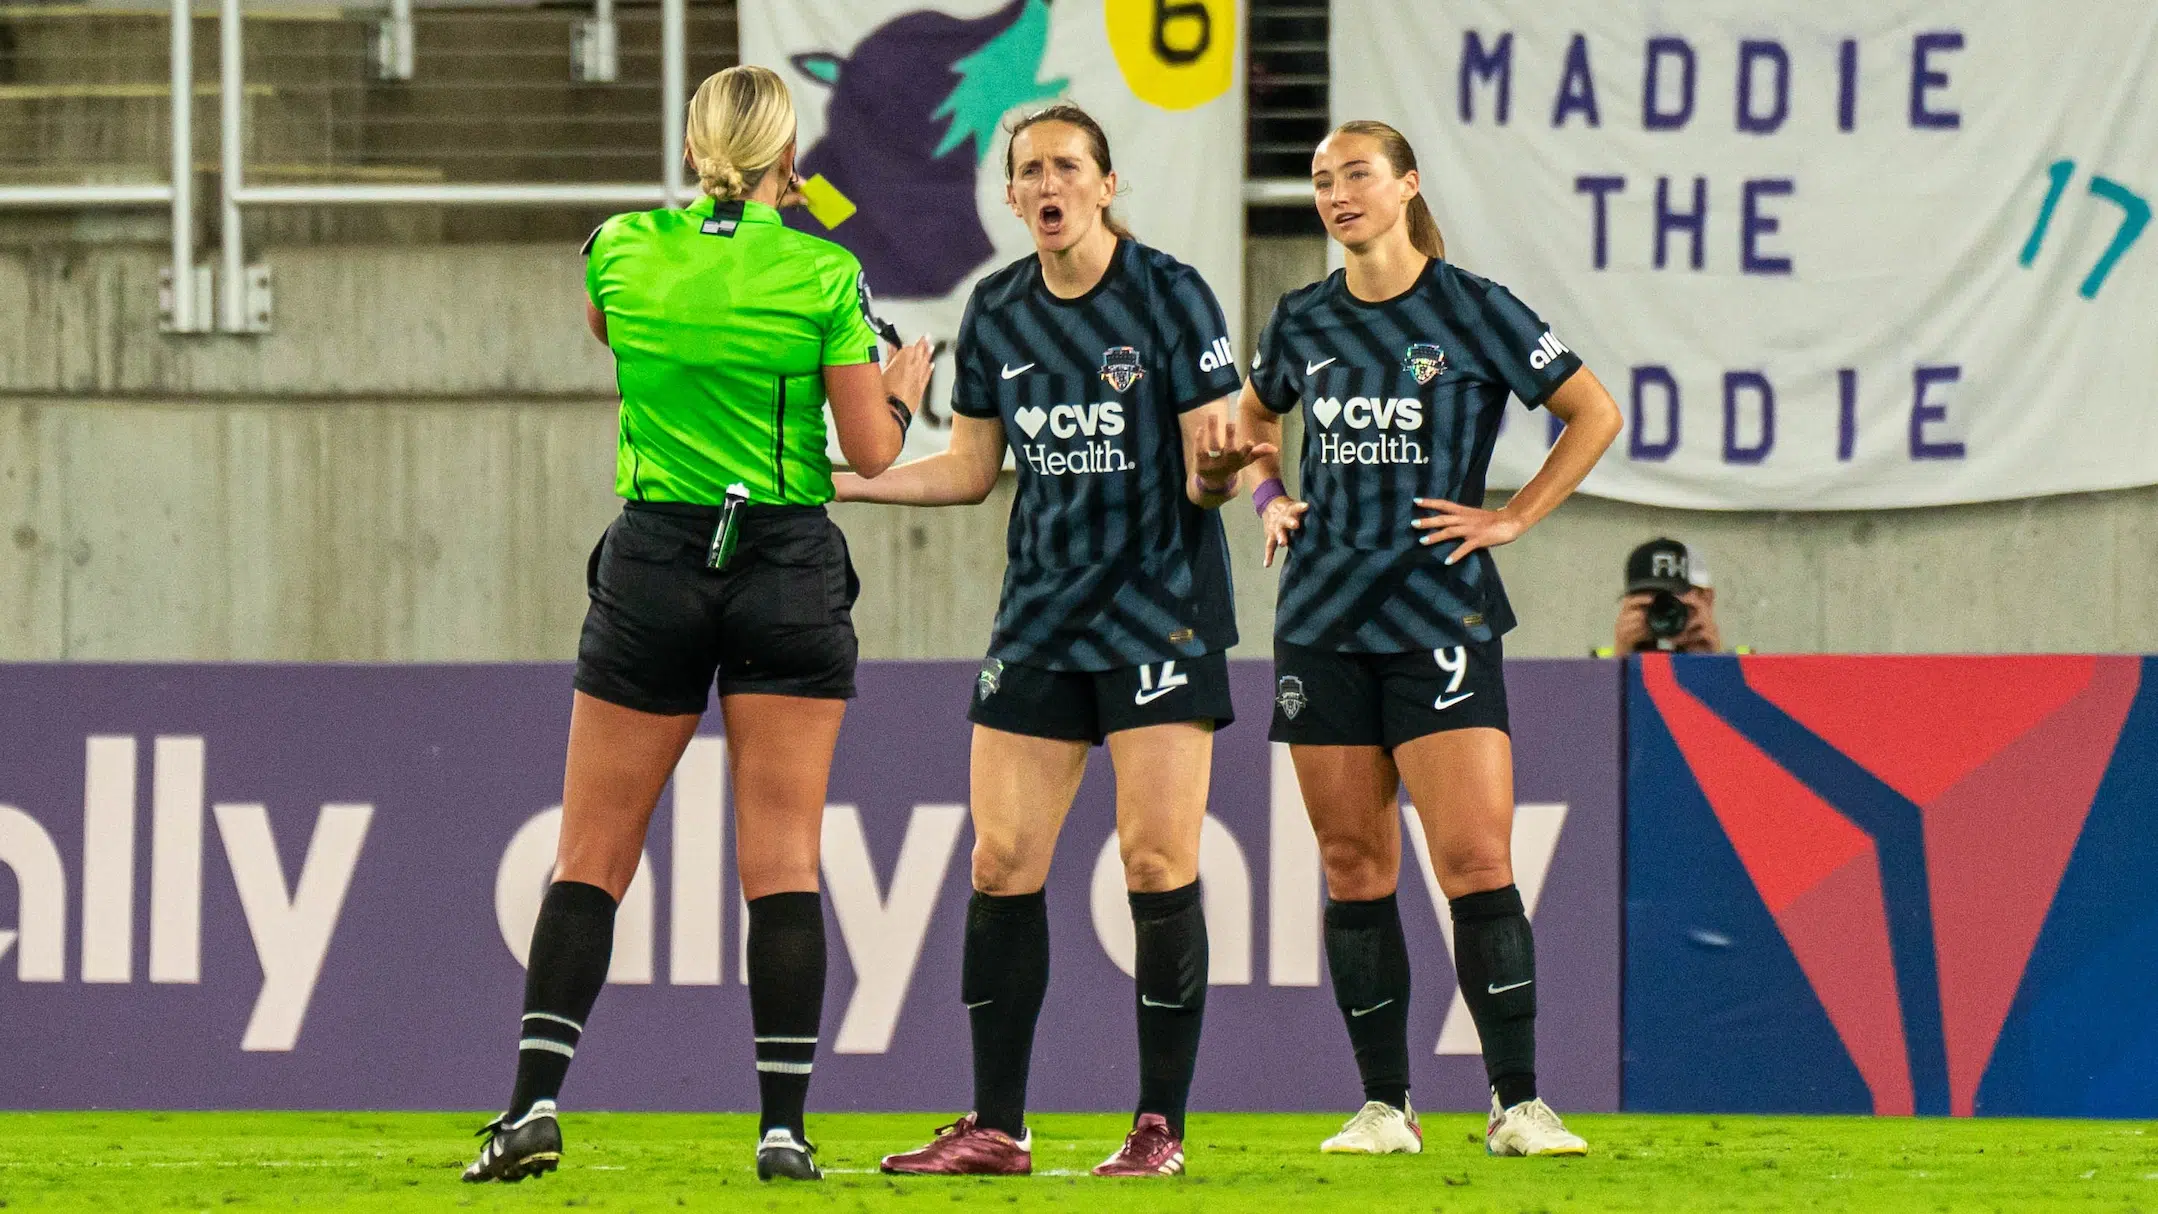 Andi Sullivan exclaims in disgust as a referee in a bright green shirt shows her a yellow card. Tara McKeown stands behind Andi with her hands on her hips.